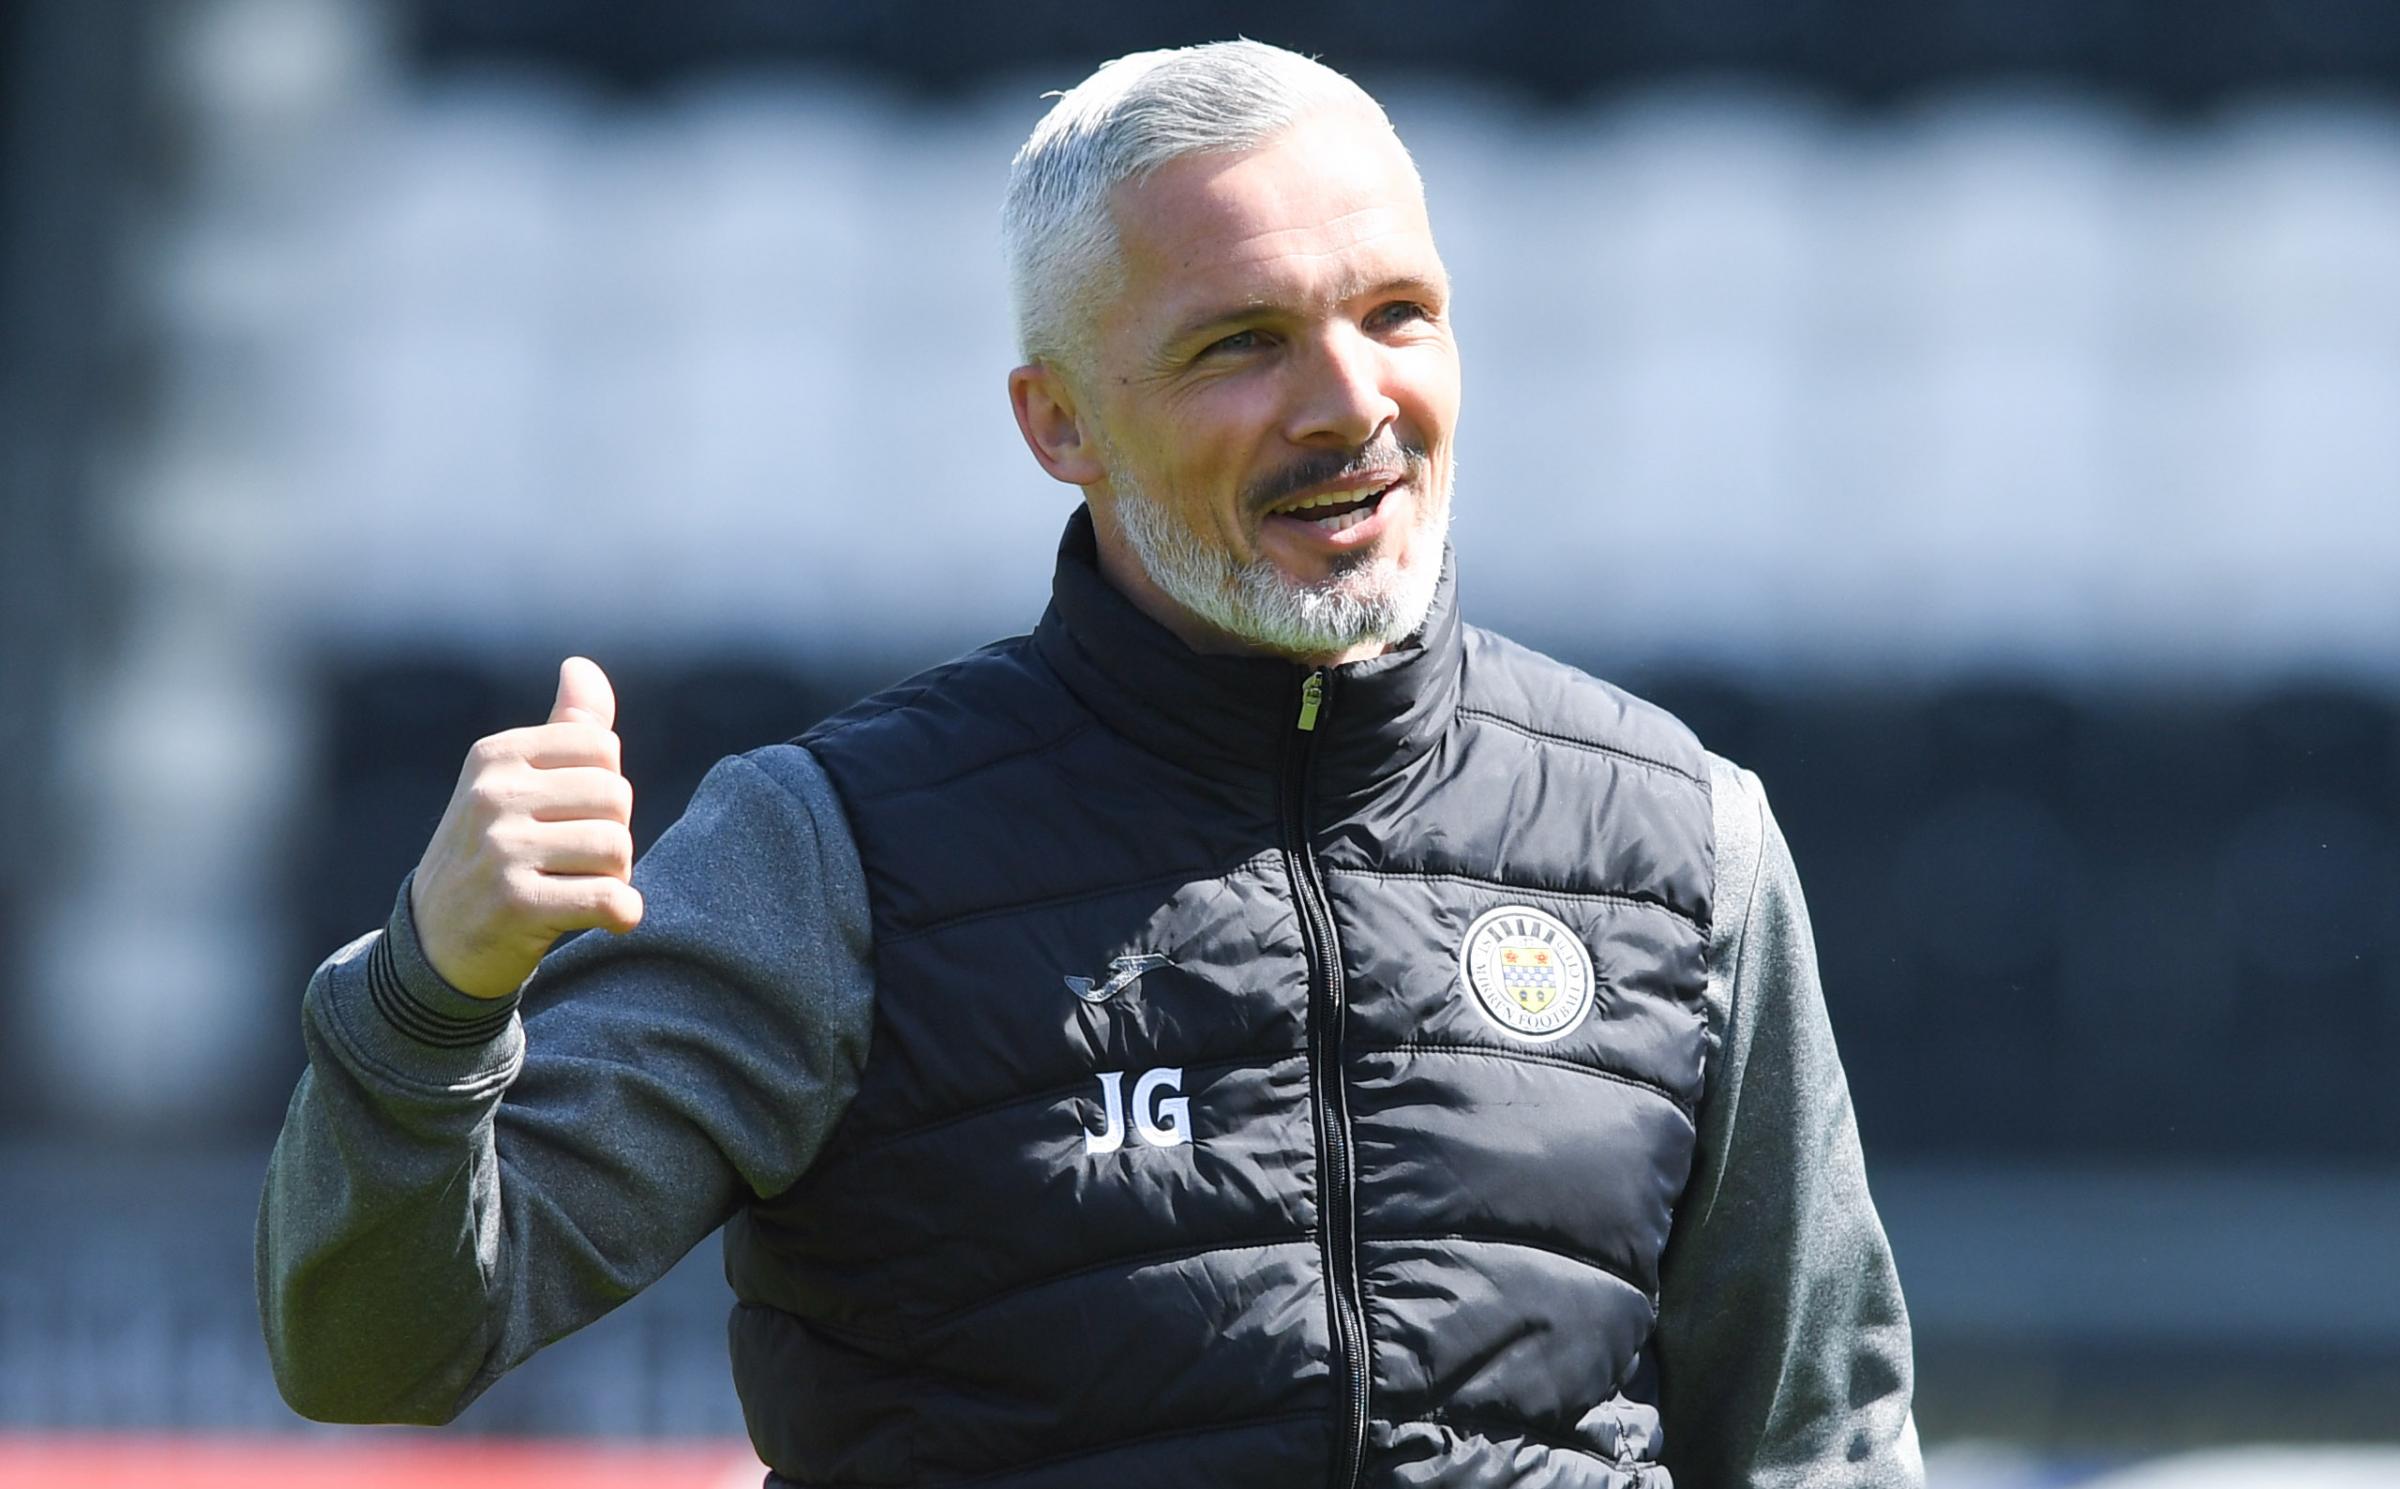 St Mirren 2021/22 preview: Lofty Buddies ambitions with top six in their sights under Jim Goodwin